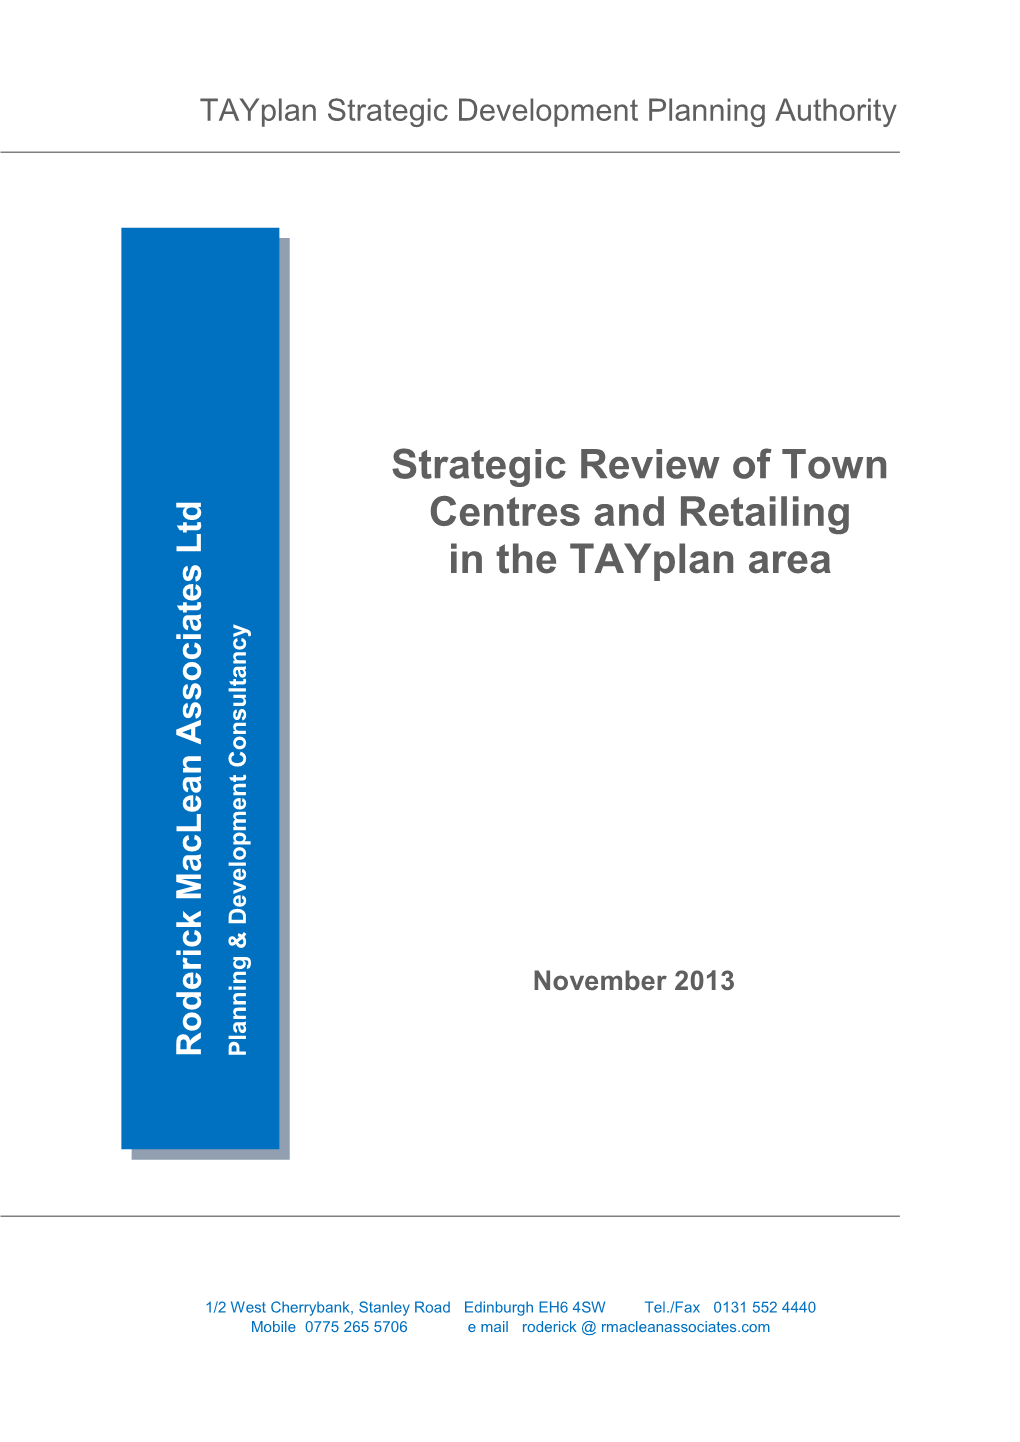 Strategic Review of Town Centres and Retailing in the Tayplan Area